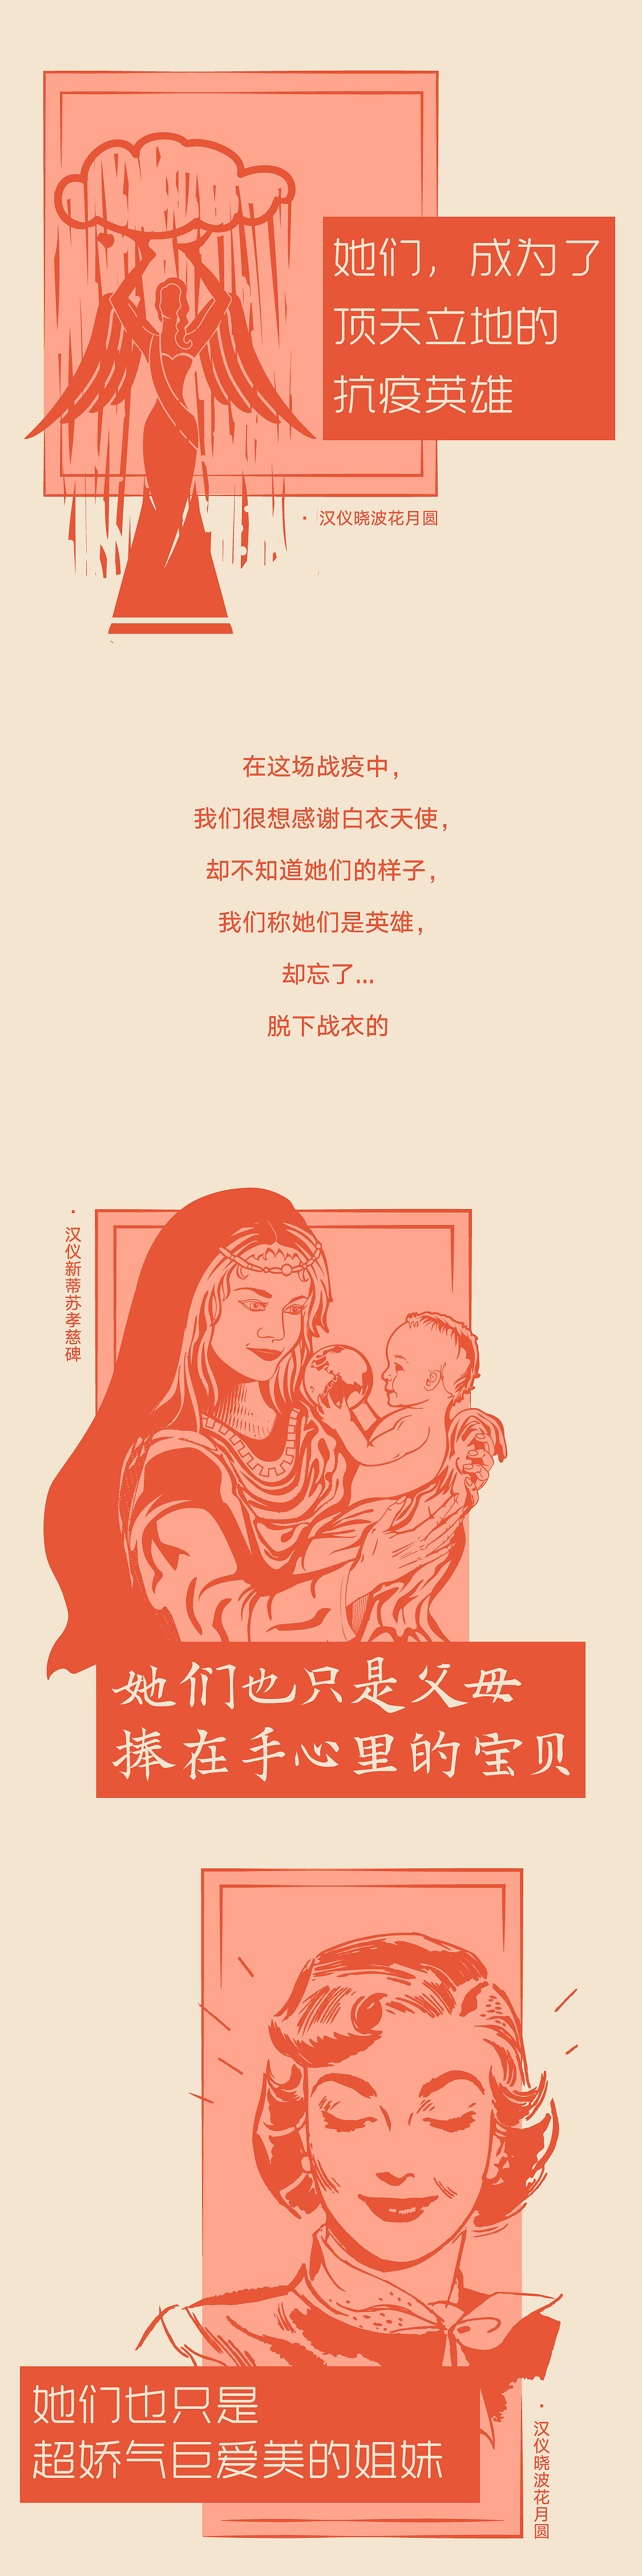 Chinese Creative Font Design-Happy Girls' Festival | Paying tribute to front-line female medical workers